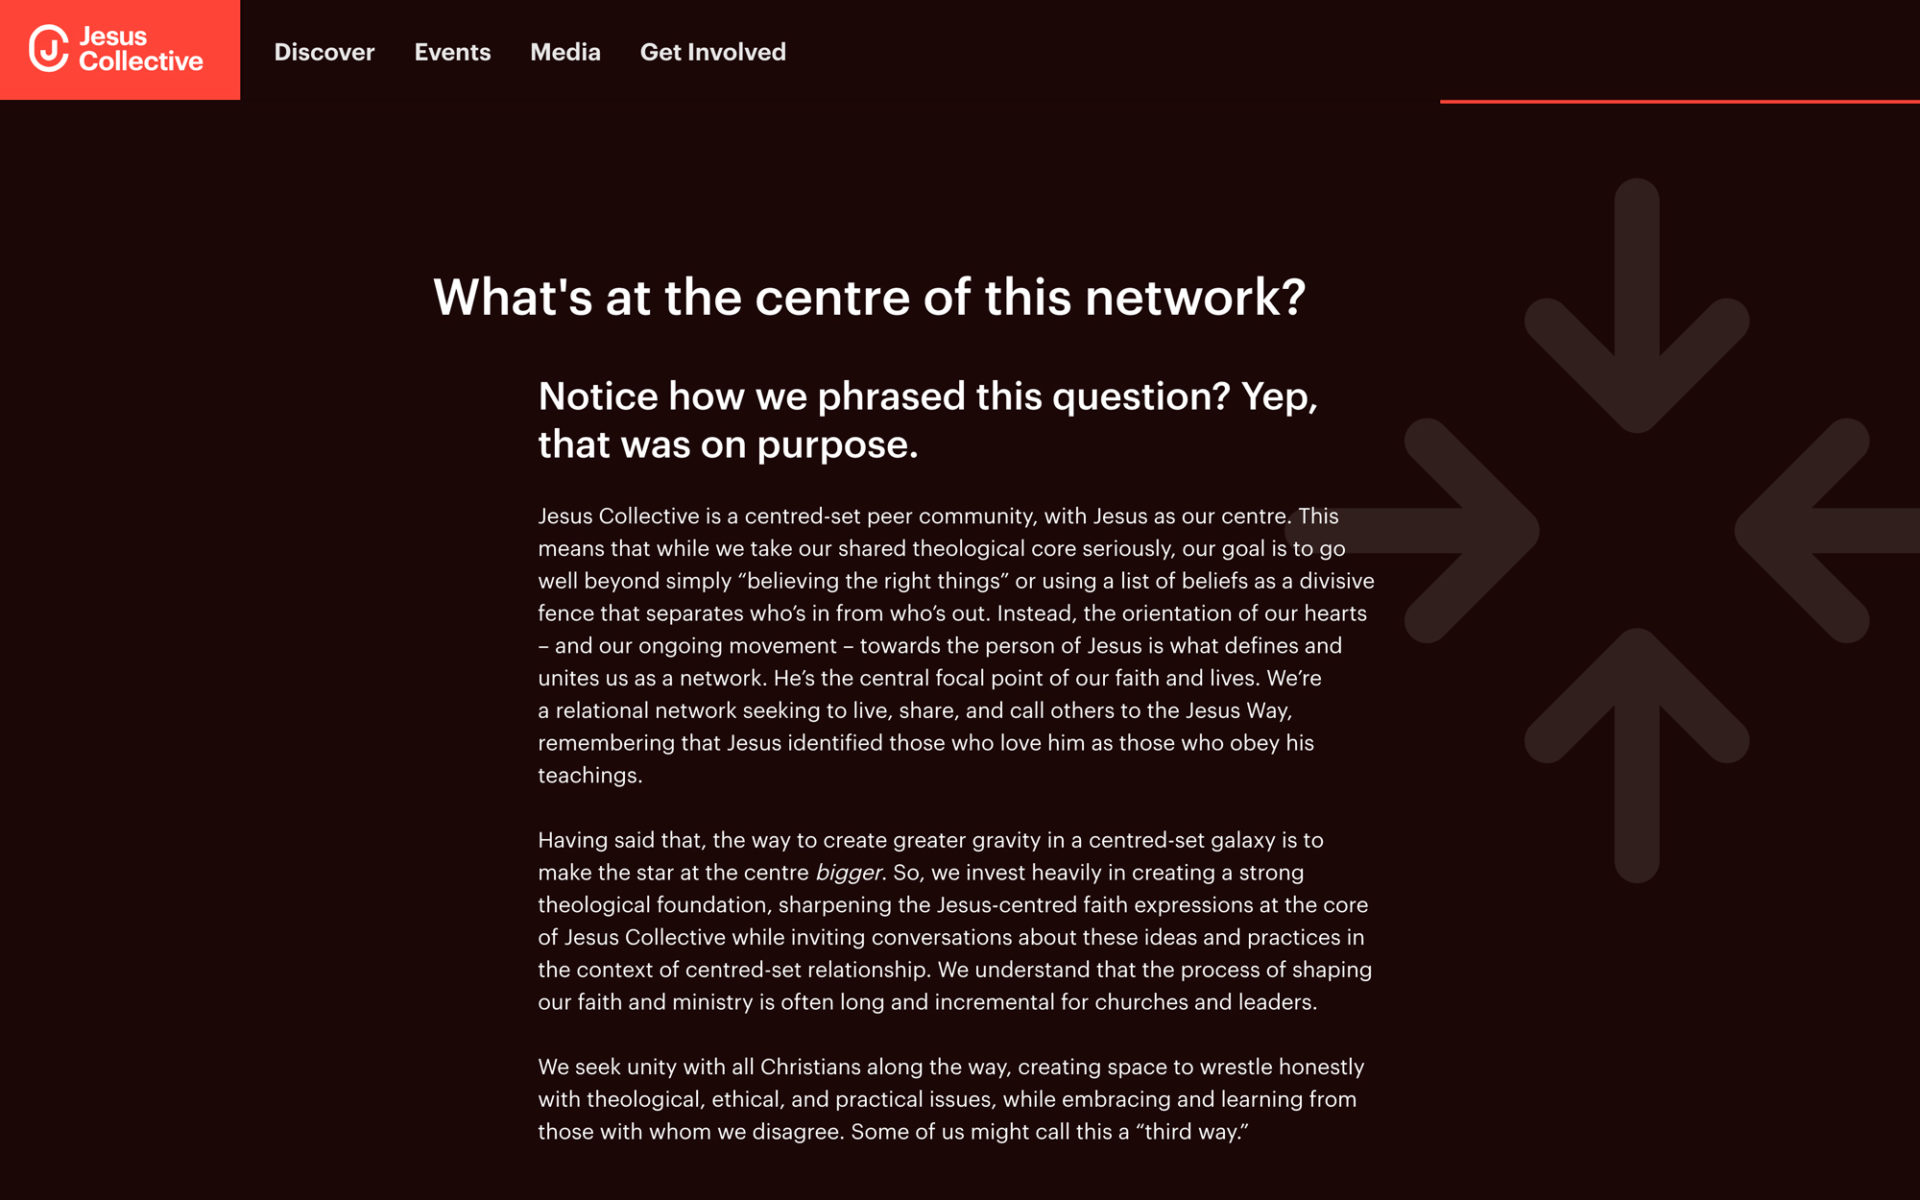 Section on the website with a dark background colour